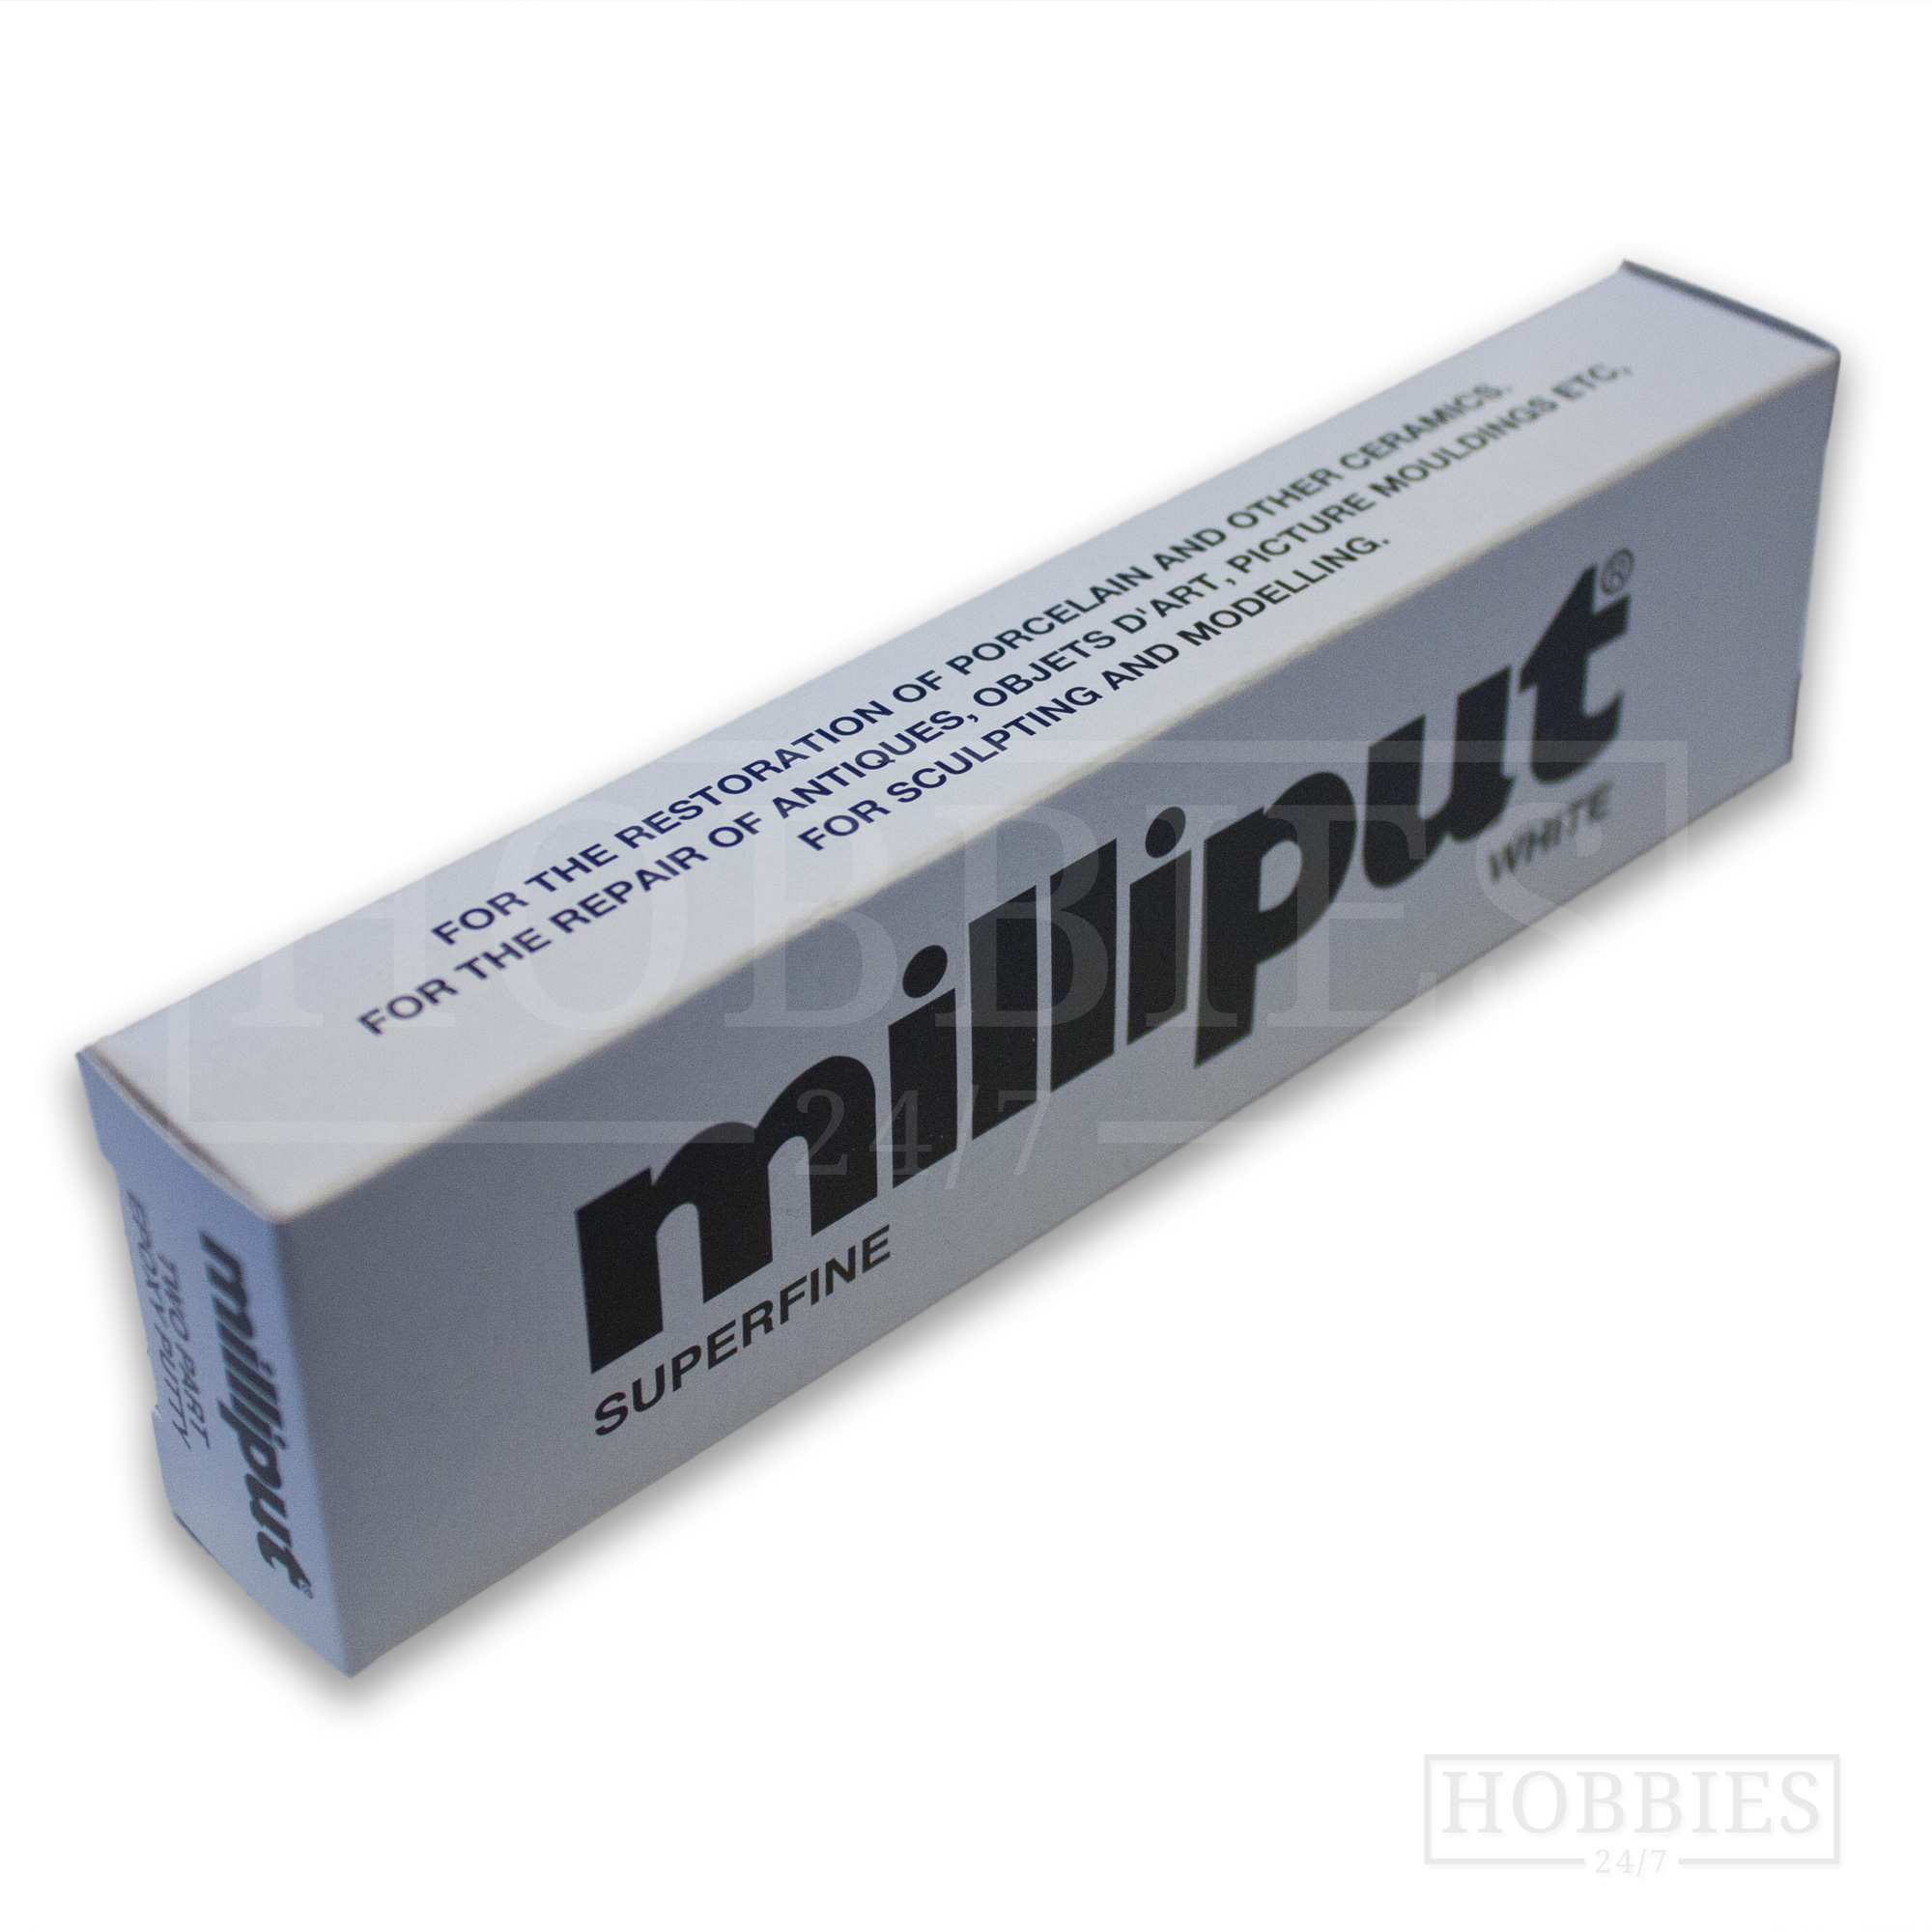 MILLIPUT SUPERFINE WHITE ADHESIVE 2 TWO PART EPOXY PUTTY MODEL FILLER MOULD